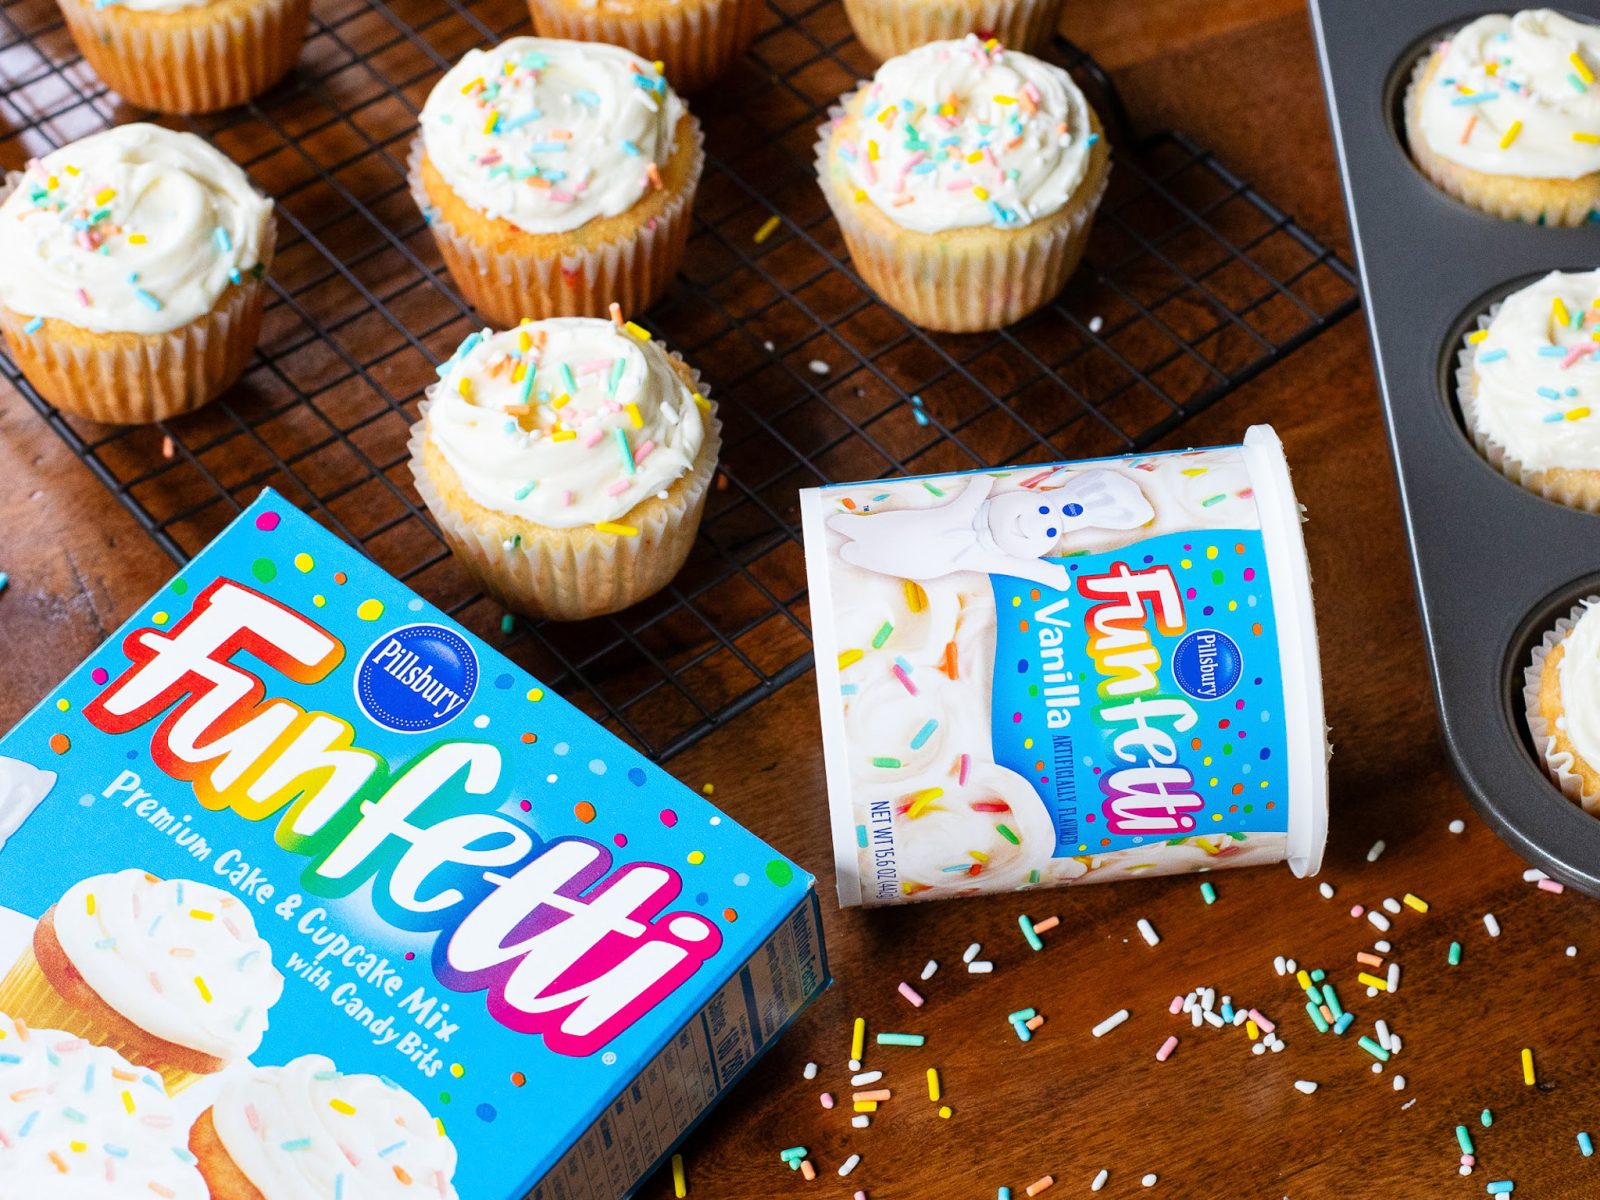 Pillsbury Cake Mix As Low As 79¢ At Kroger – Plus Cheap Frosting